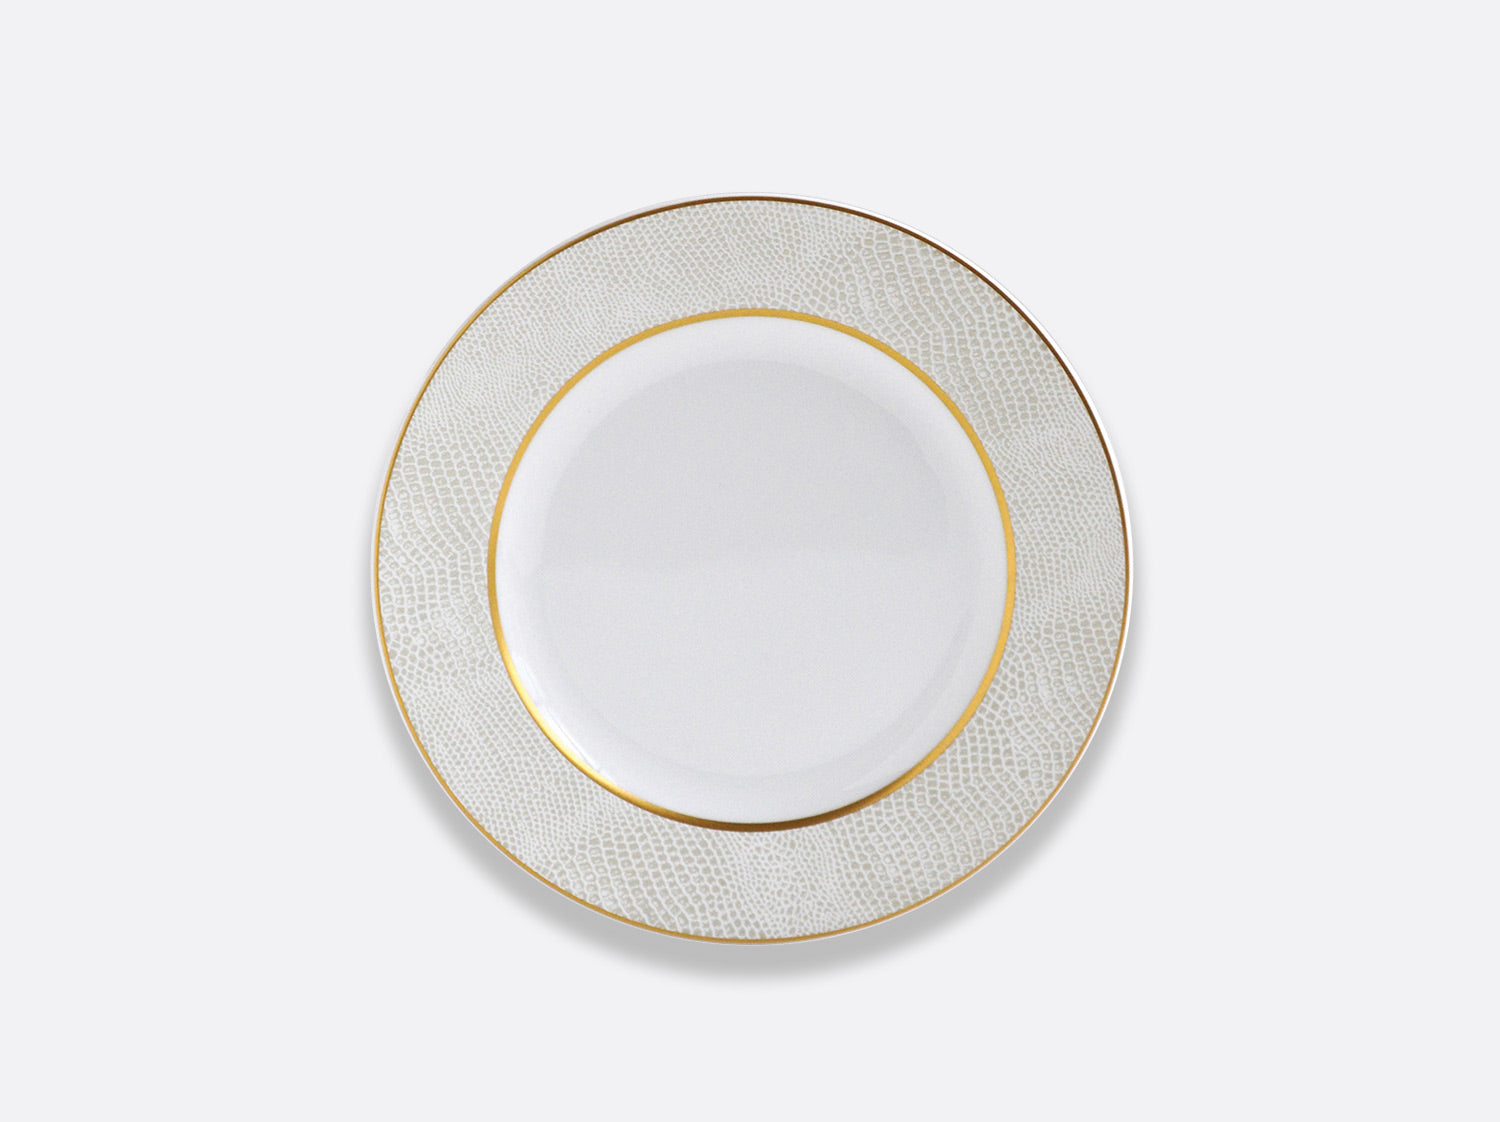 Sauvage White Bread & Butter Plate